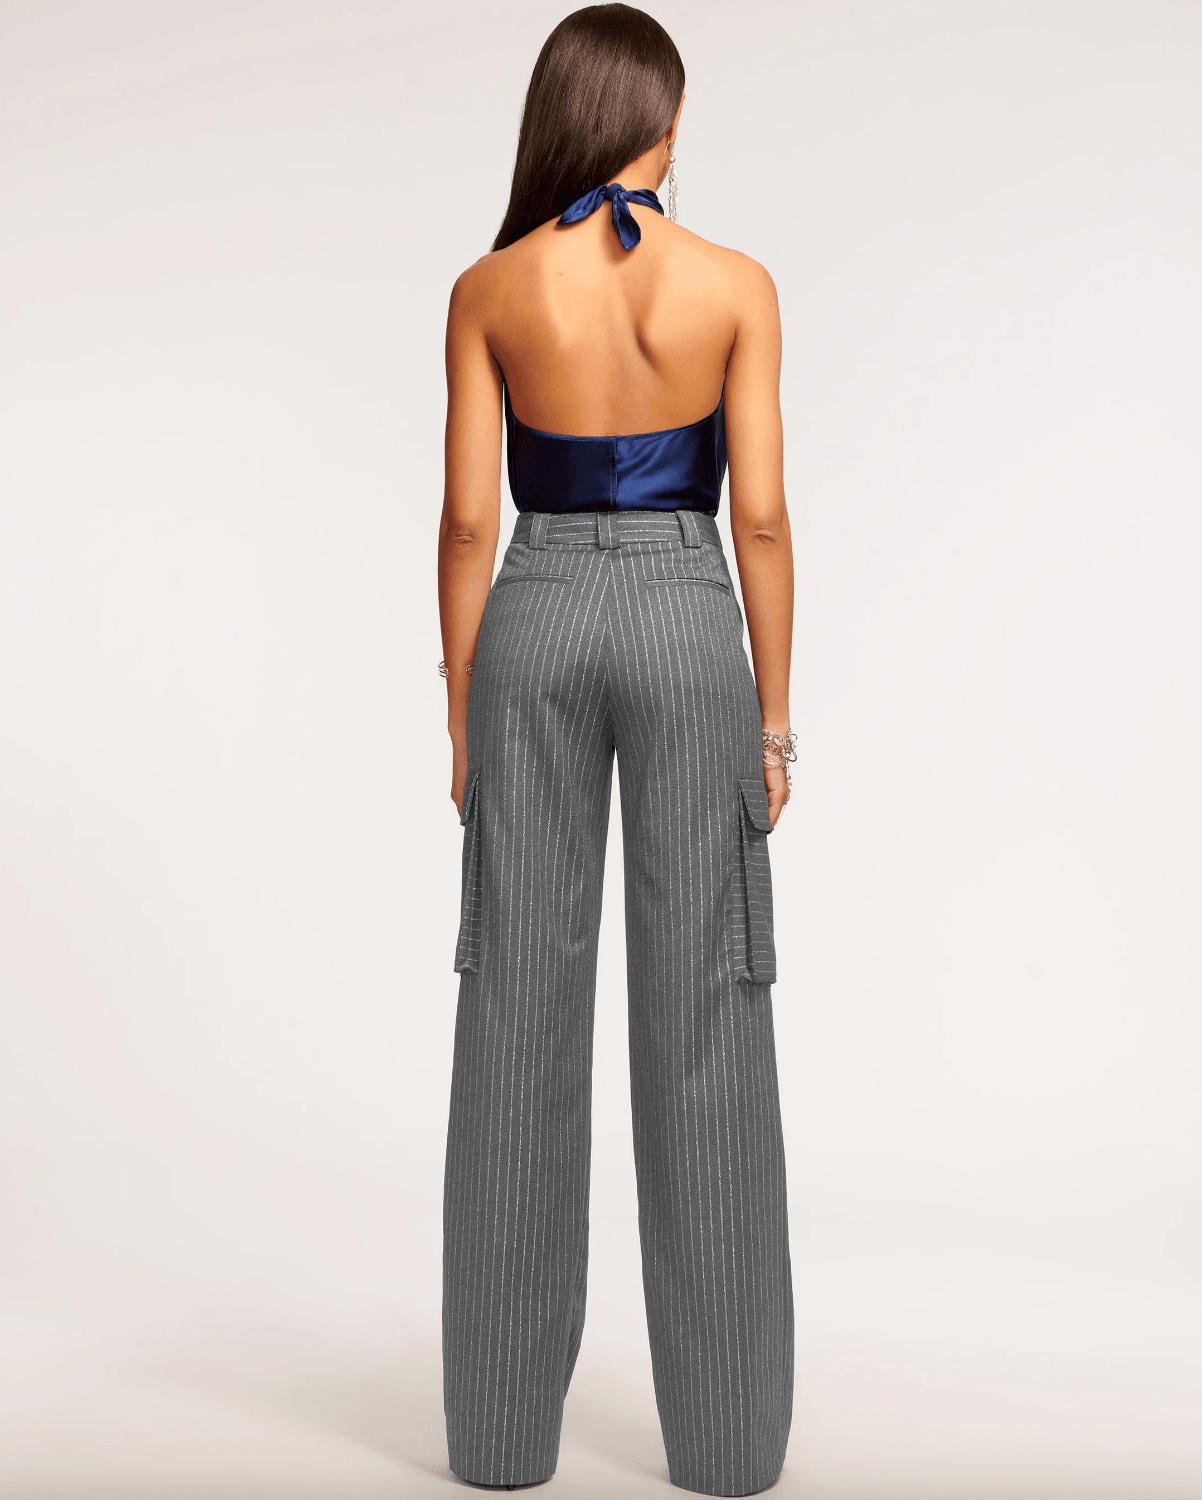 Noa High-Waisted Pant by Ramy Brook - Haven